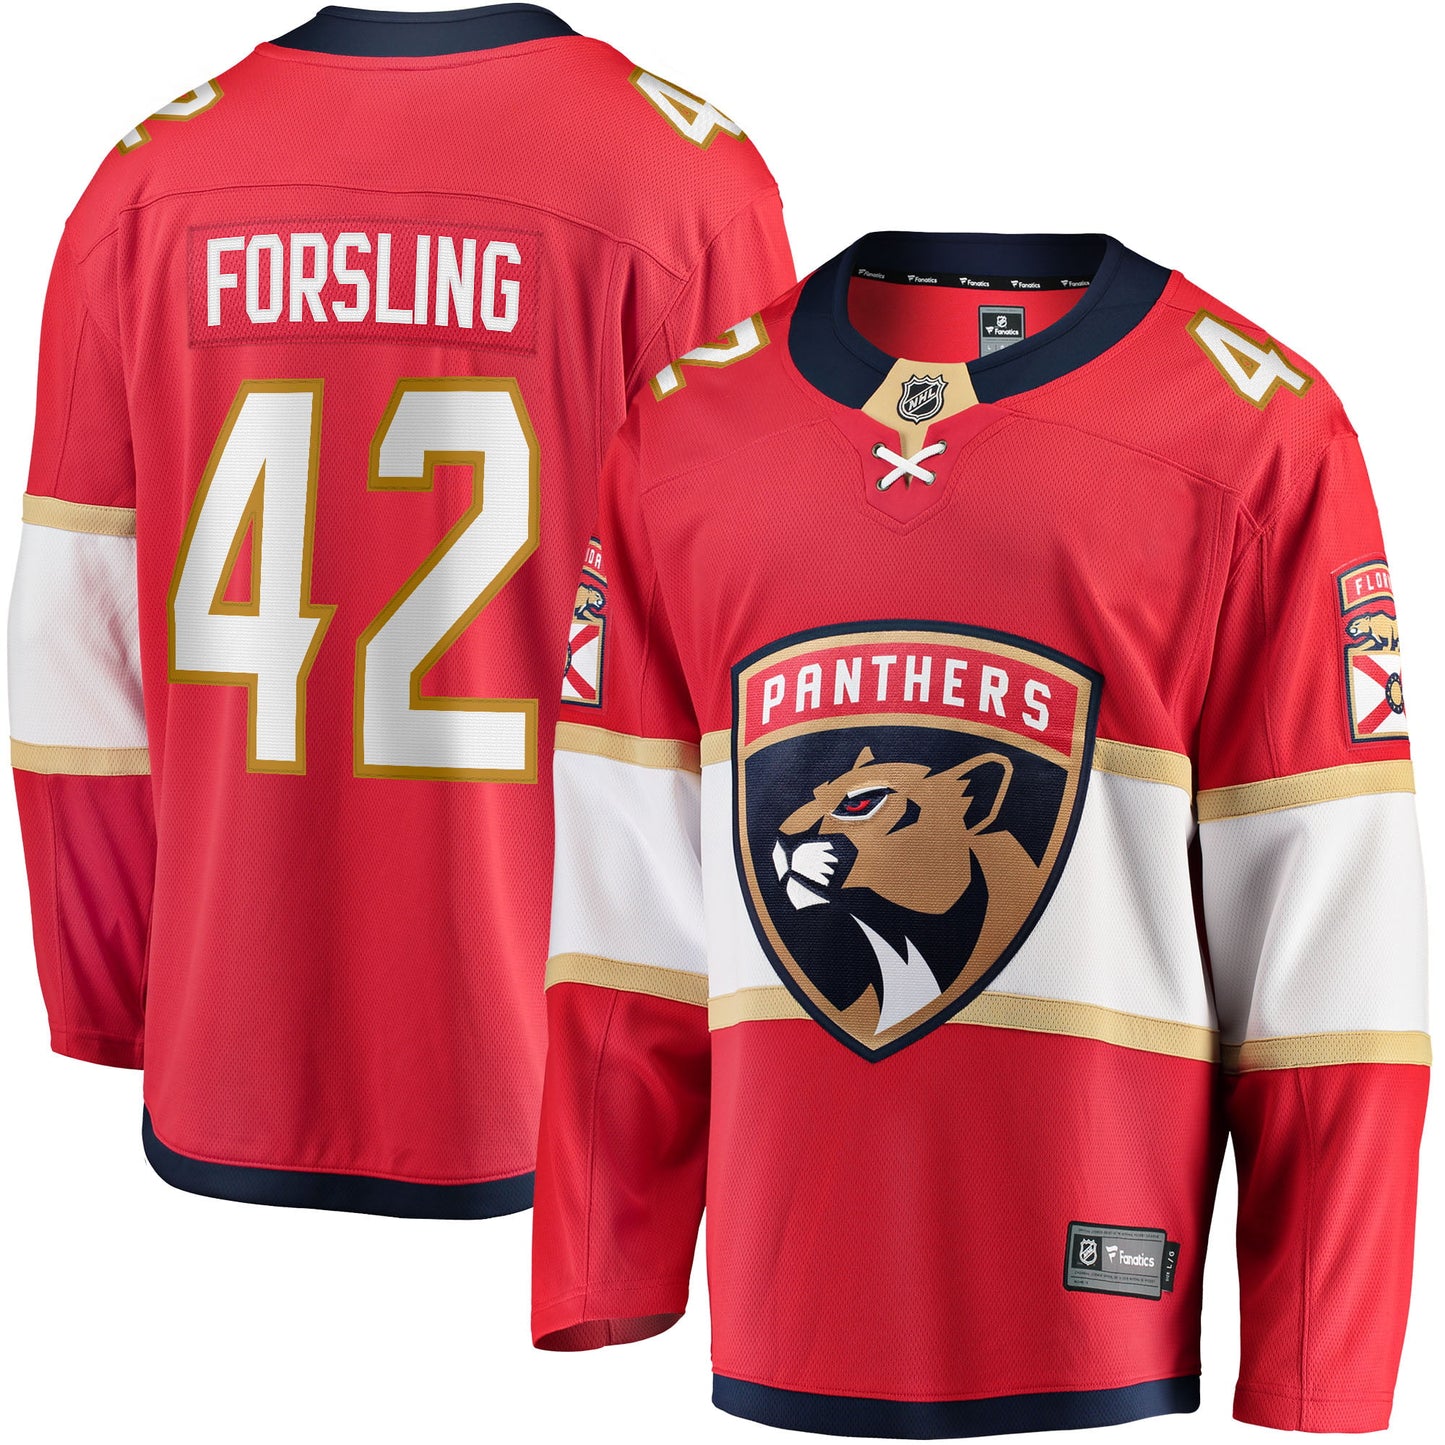 Men's Fanatics Branded Gustav Forsling Red Florida Panthers Home Breakaway Player Jersey